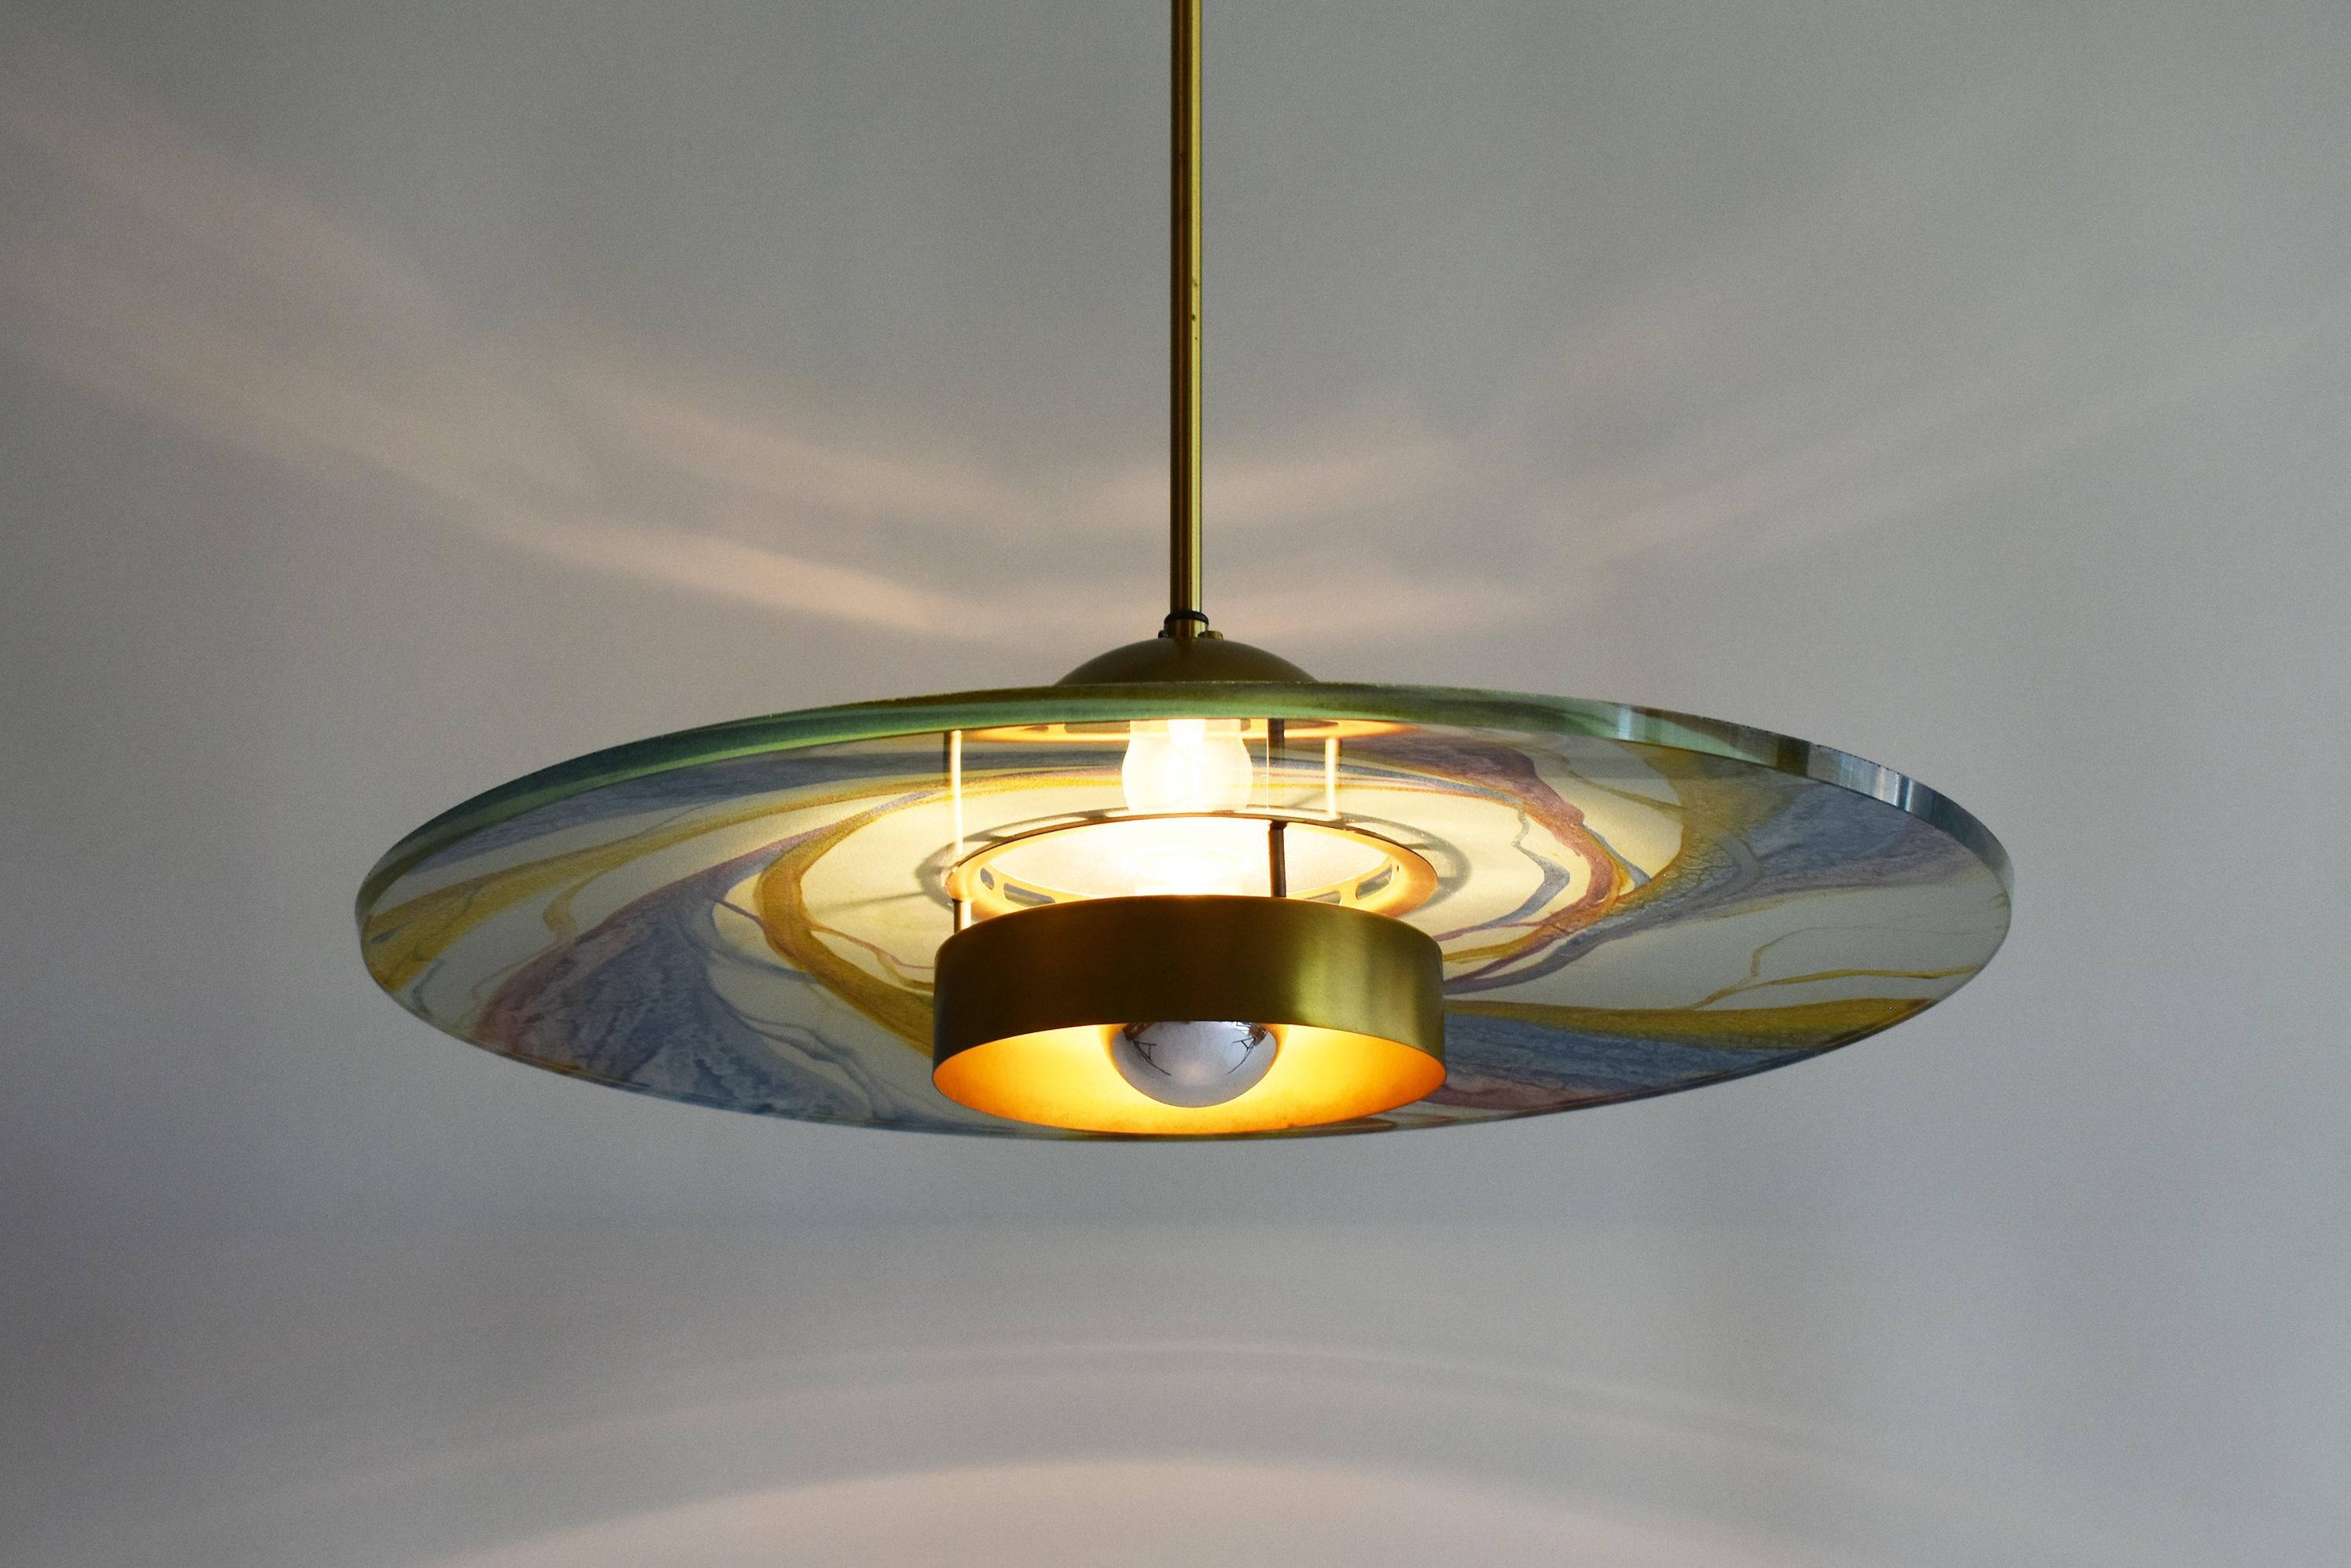 Hand painted glass lamp by Sische Leuchte.
The glass shade sits on a brass bell, reflecting the light upward.
Very nice light, with colour and patterns variations.
Can be used with 110V or 220V, with standard bulb Edison E24